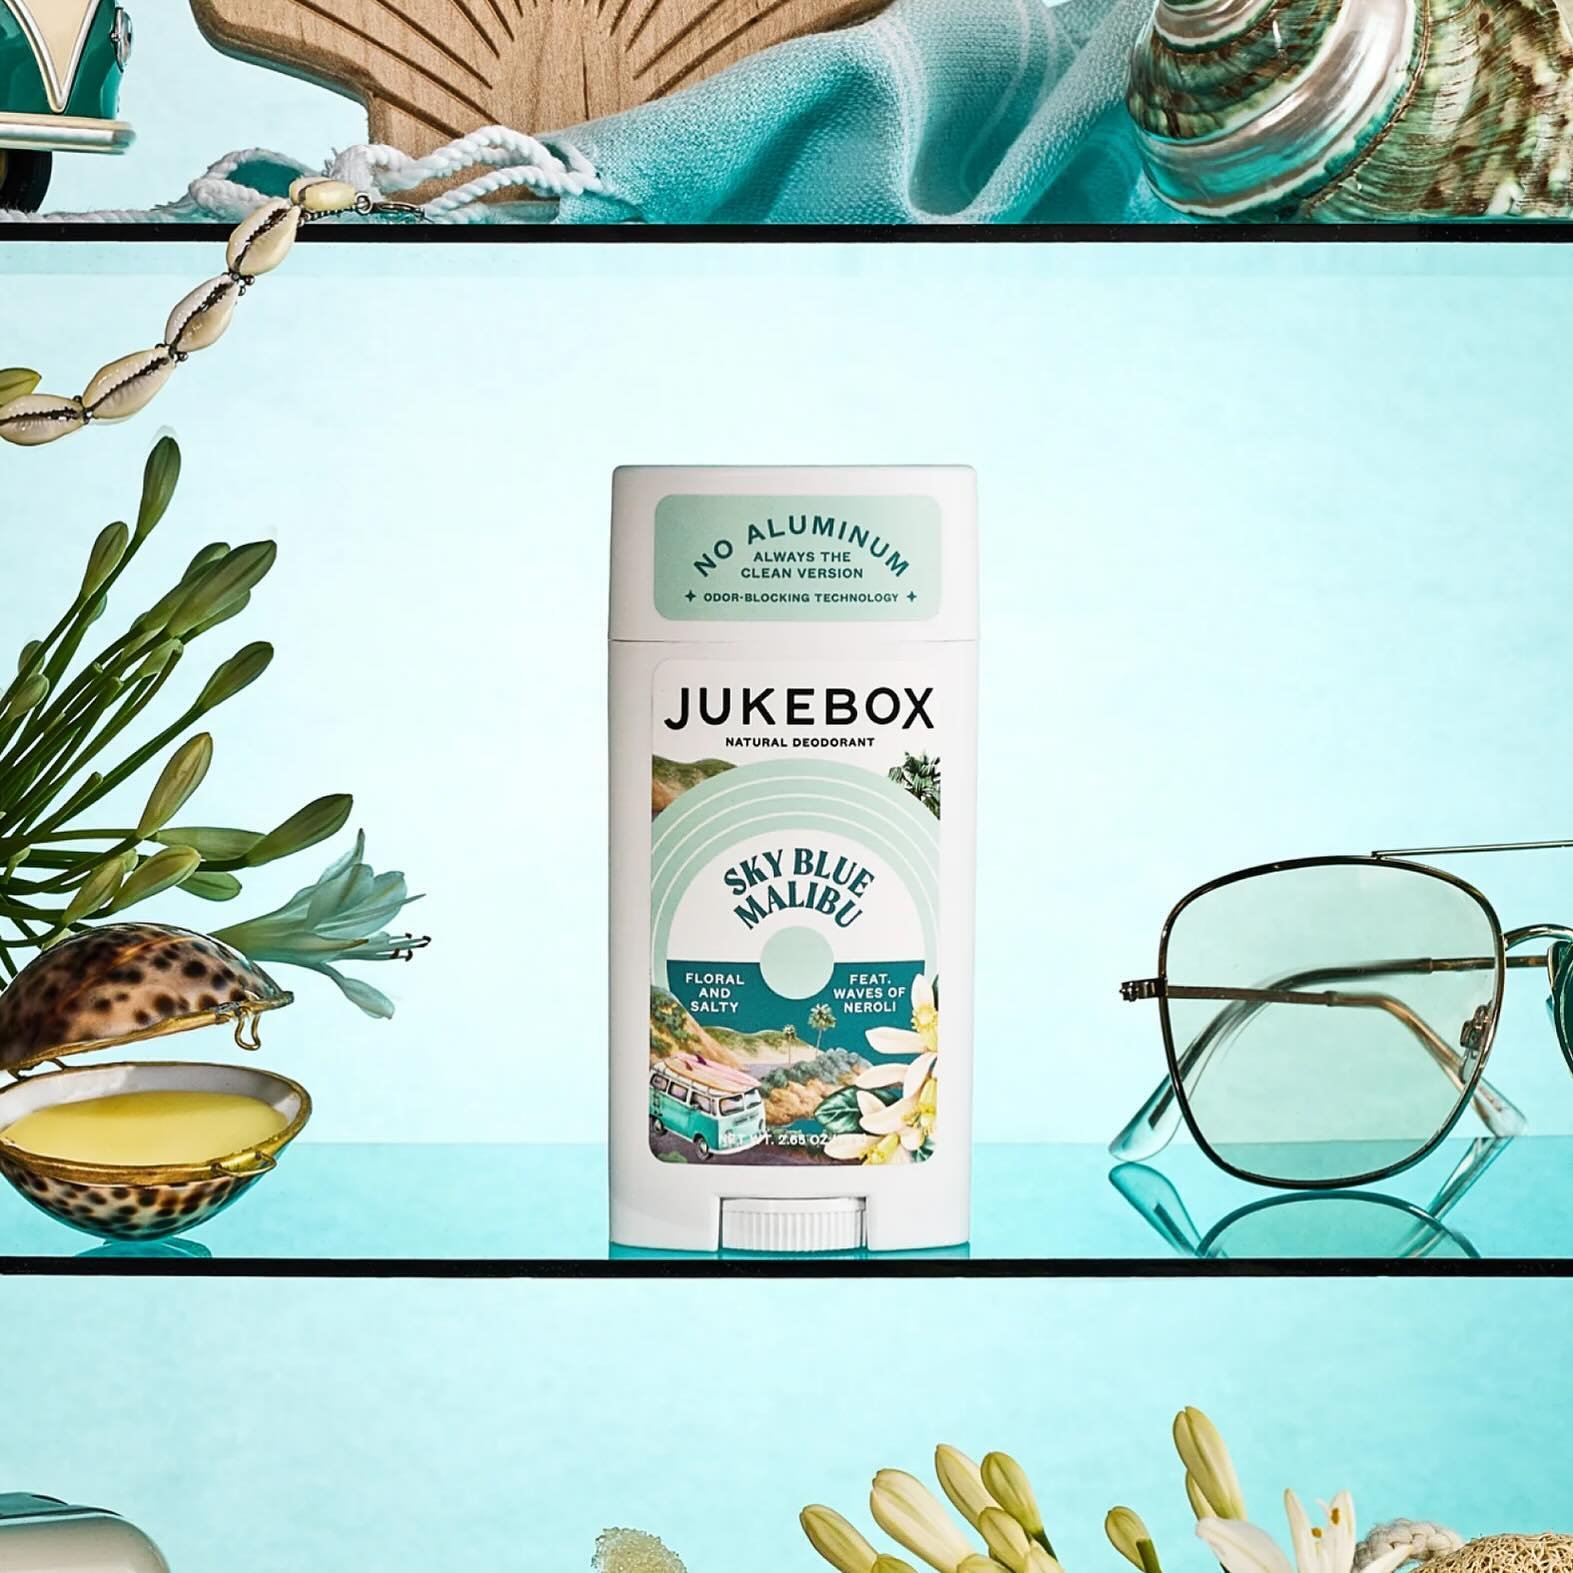 🚨Just in! @myjukebox launched a new deodorant scent today, Sky Blue Malibu!🚨 This floral and salty scent reminds us of a dreamy seaside day, plus it&rsquo;s already available in the bar soap so your customers can get a matching pair!